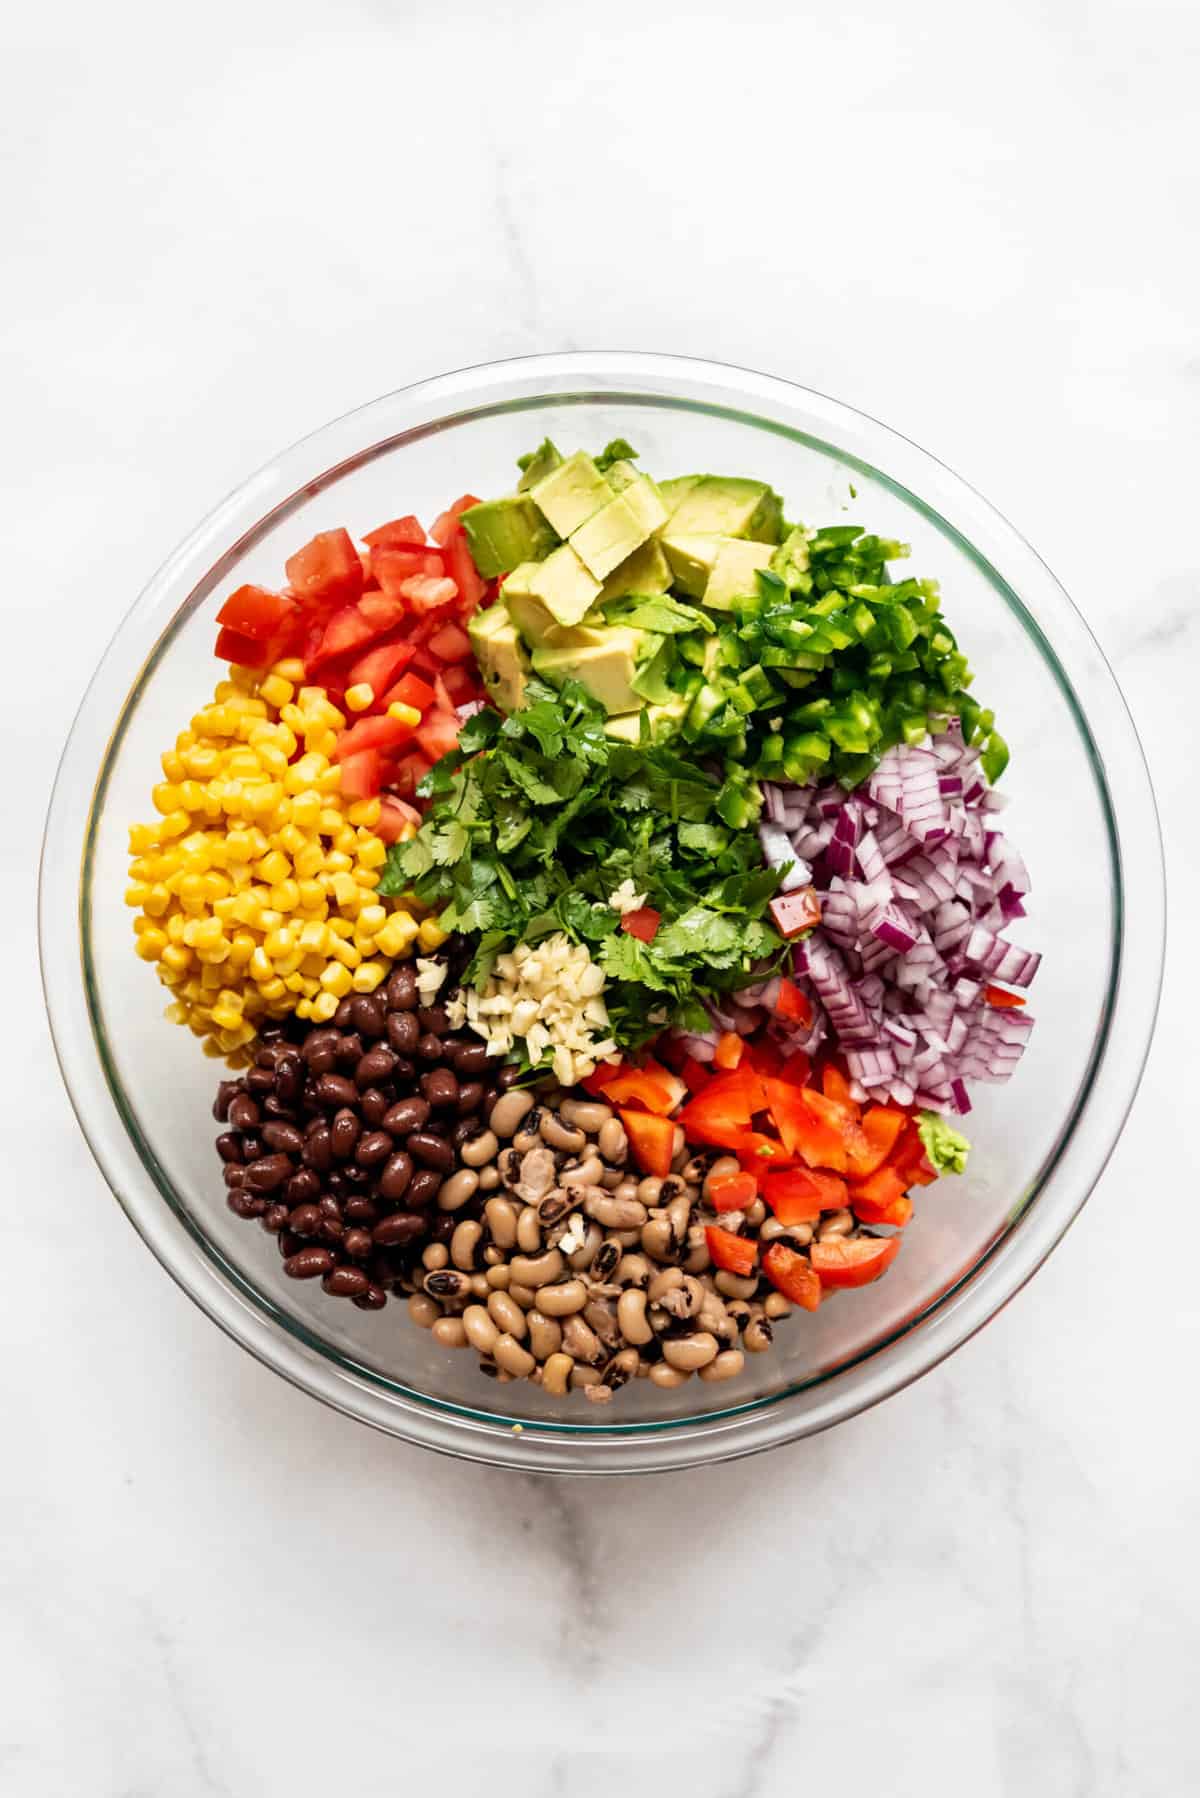 Adding cowboy caviar ingredients to a bowl so you can see the piles of different types of beans, corn, tomatoes, avocado, tomato, bell pepper, red onion, and cilantro.